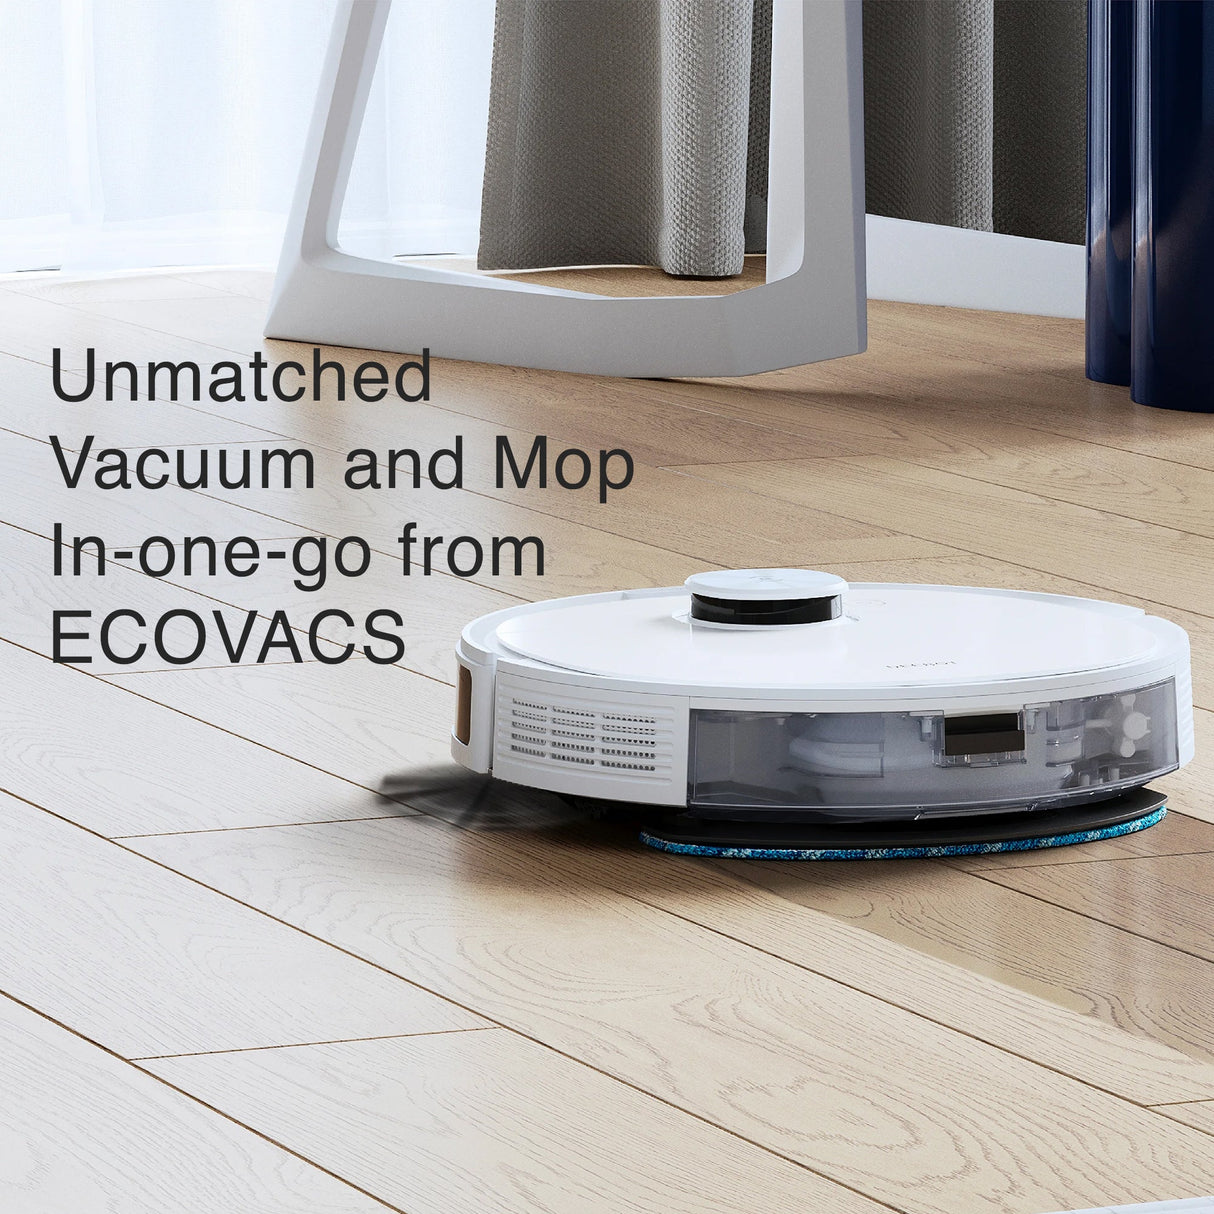 DEEBOT N10 Robot Vacuum Cleaner - 4300Pa, 330min Runtime, dToF  - UNBOXED DEAL